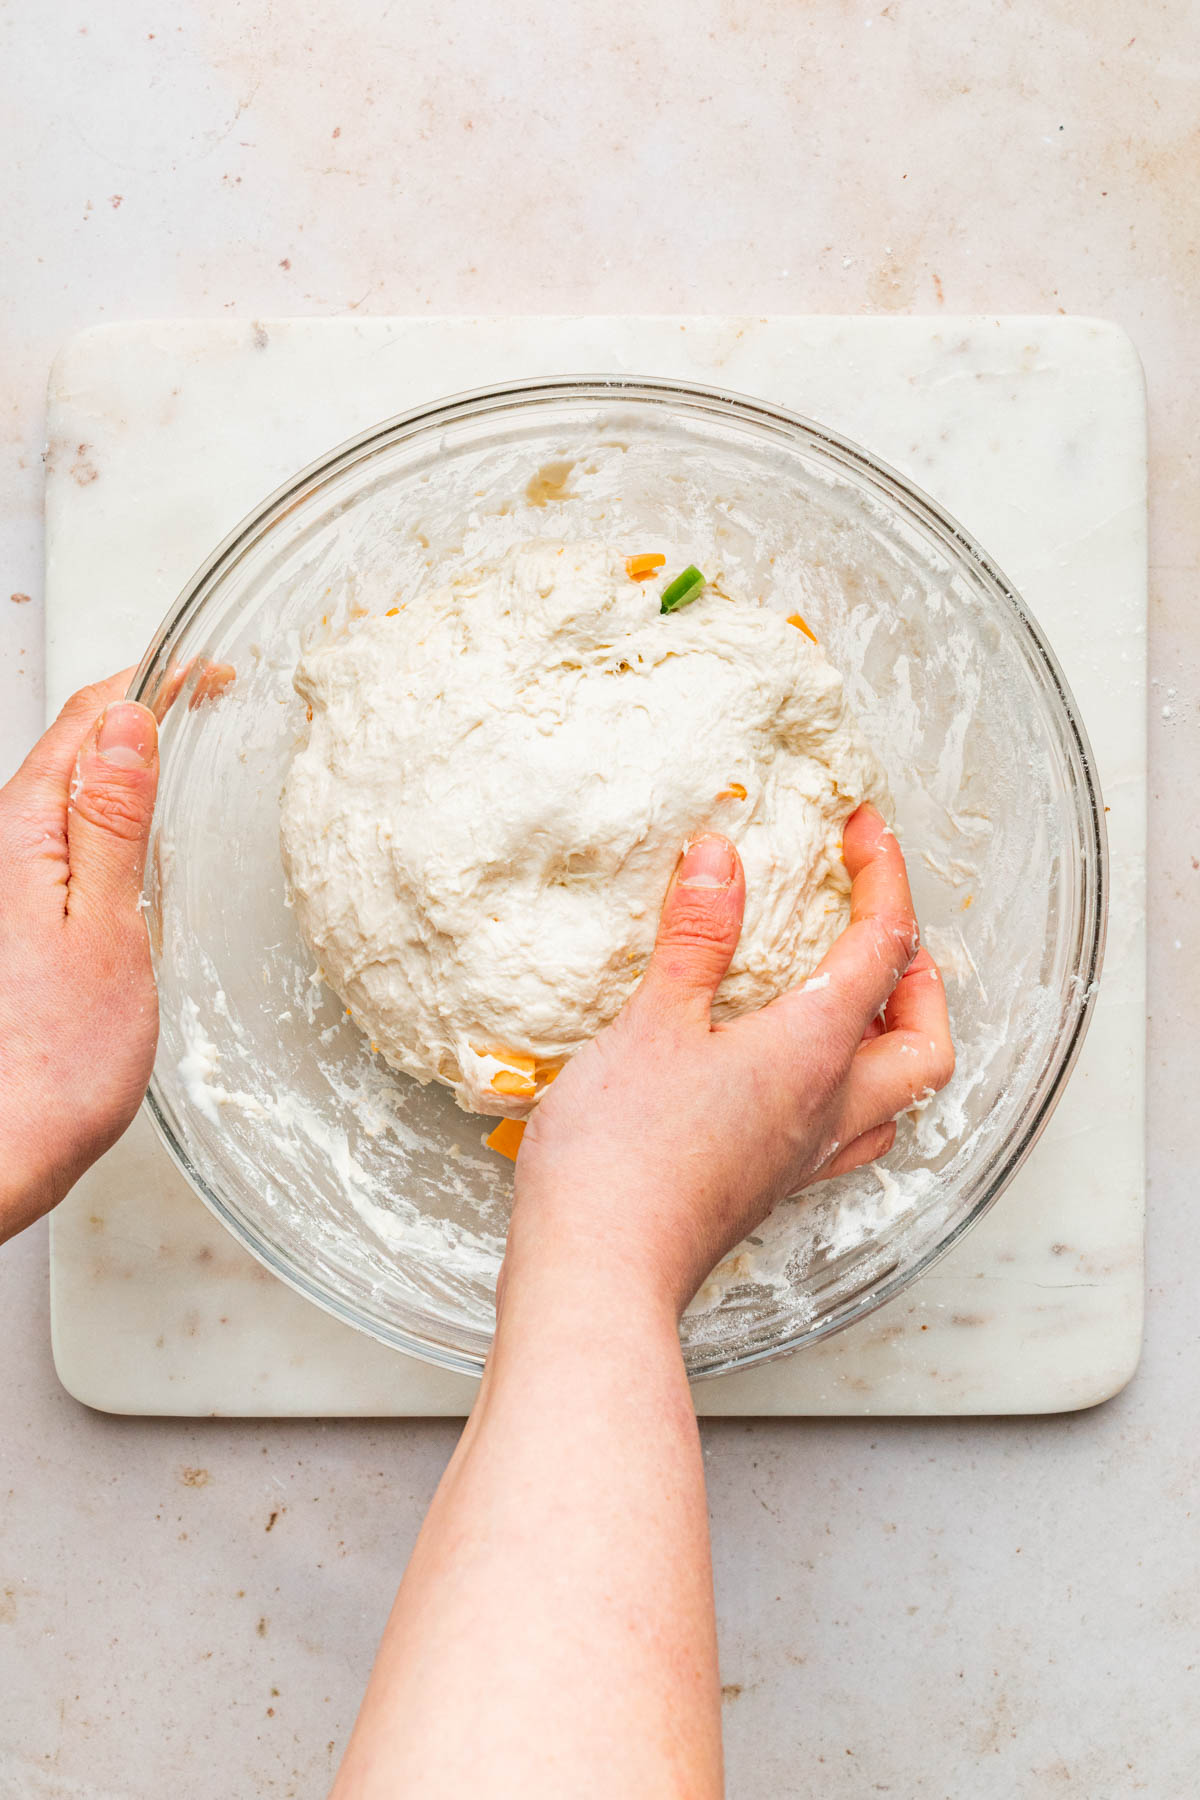 A hand mixing dough in a bowl.